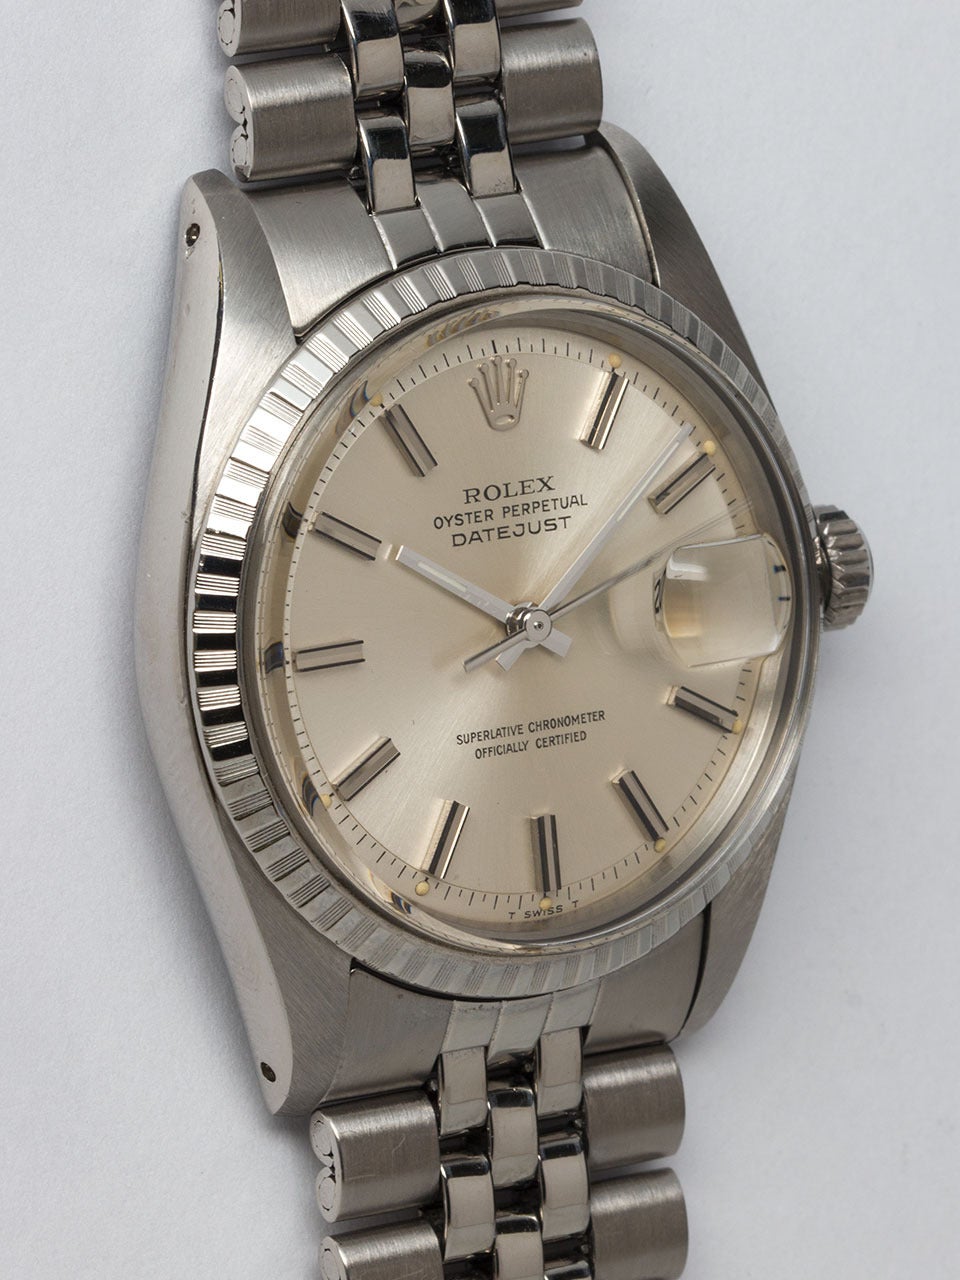 Rolex Stainless Steel Datejust Wristwatch ref 1603 serial #3.2 million circa 1972. 36mm diameter full size man's model with engine turned bezel. Silver satin dial featuring so called 